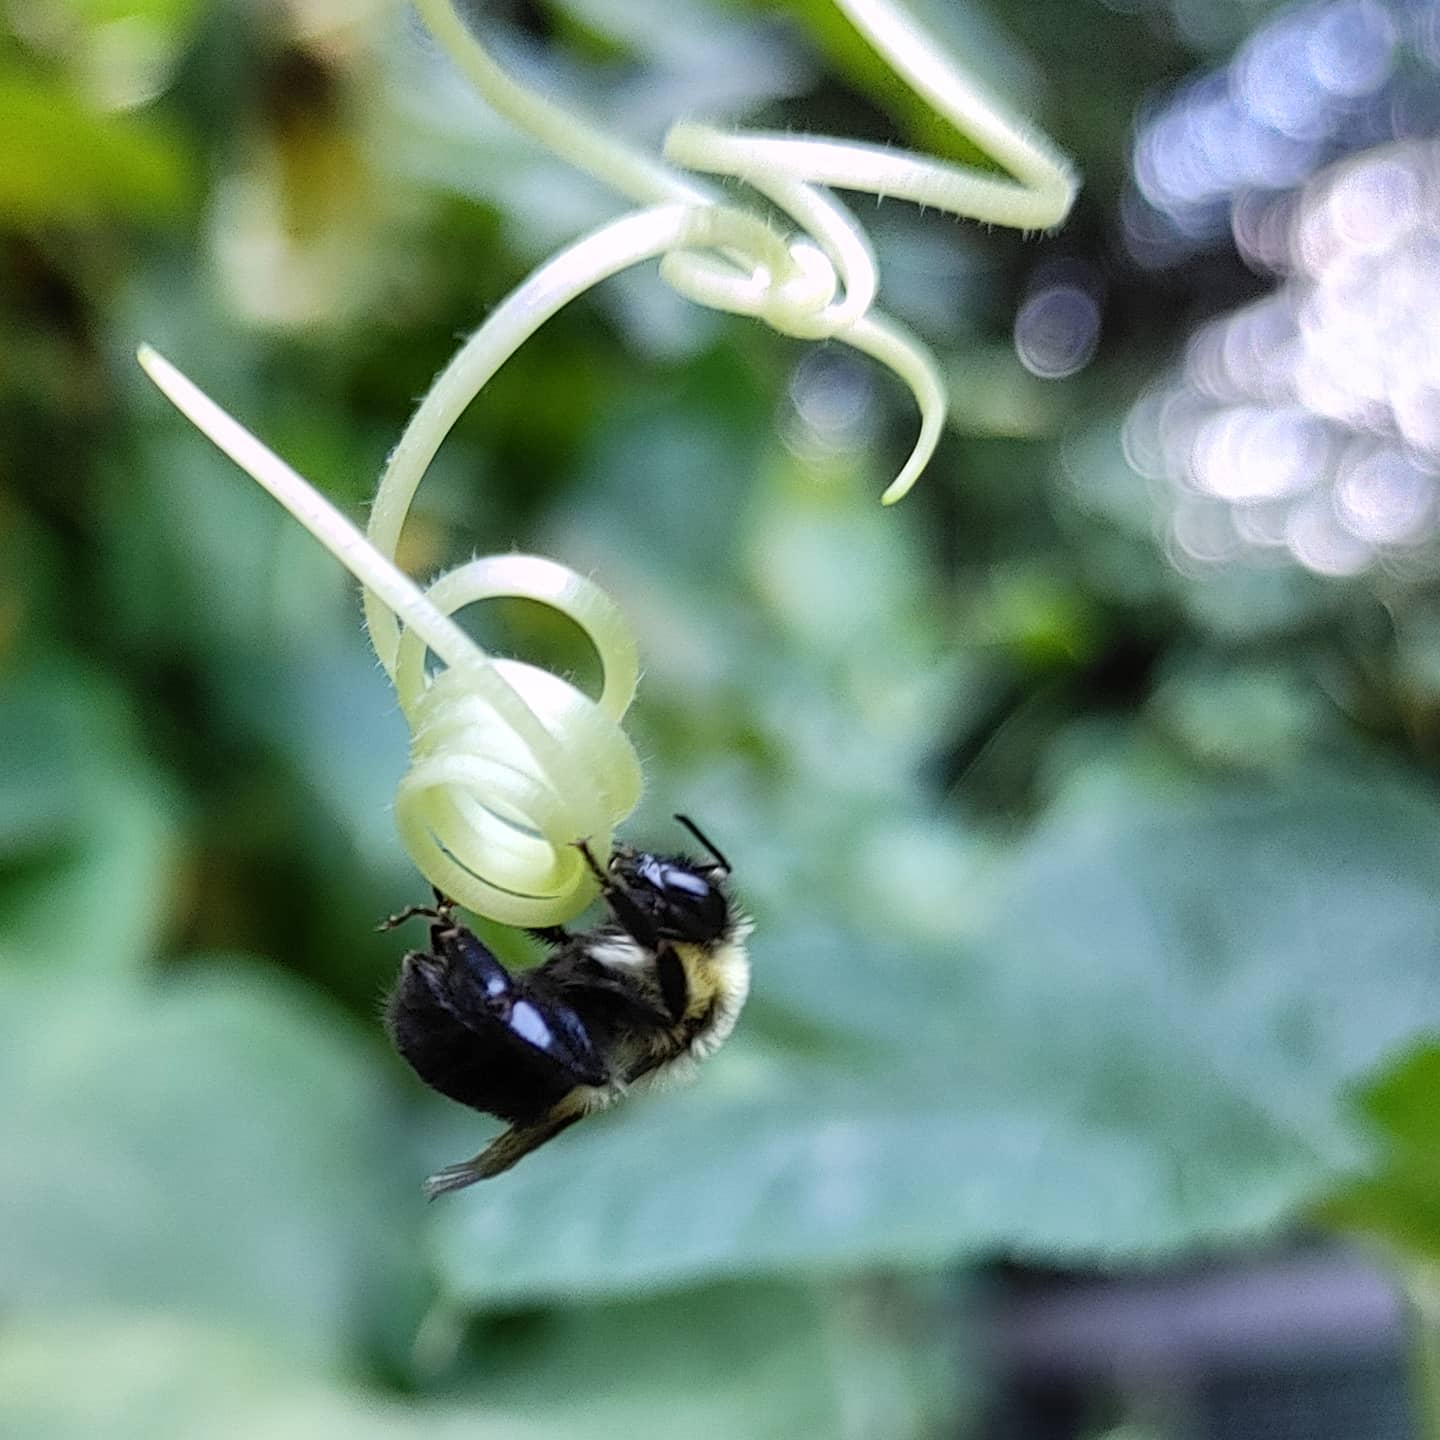 Auditions for Cirque bee Soleil are happening on the cucumber vine today. She's hanging from a curlicue, suspended by just her fingertips! Such skill!